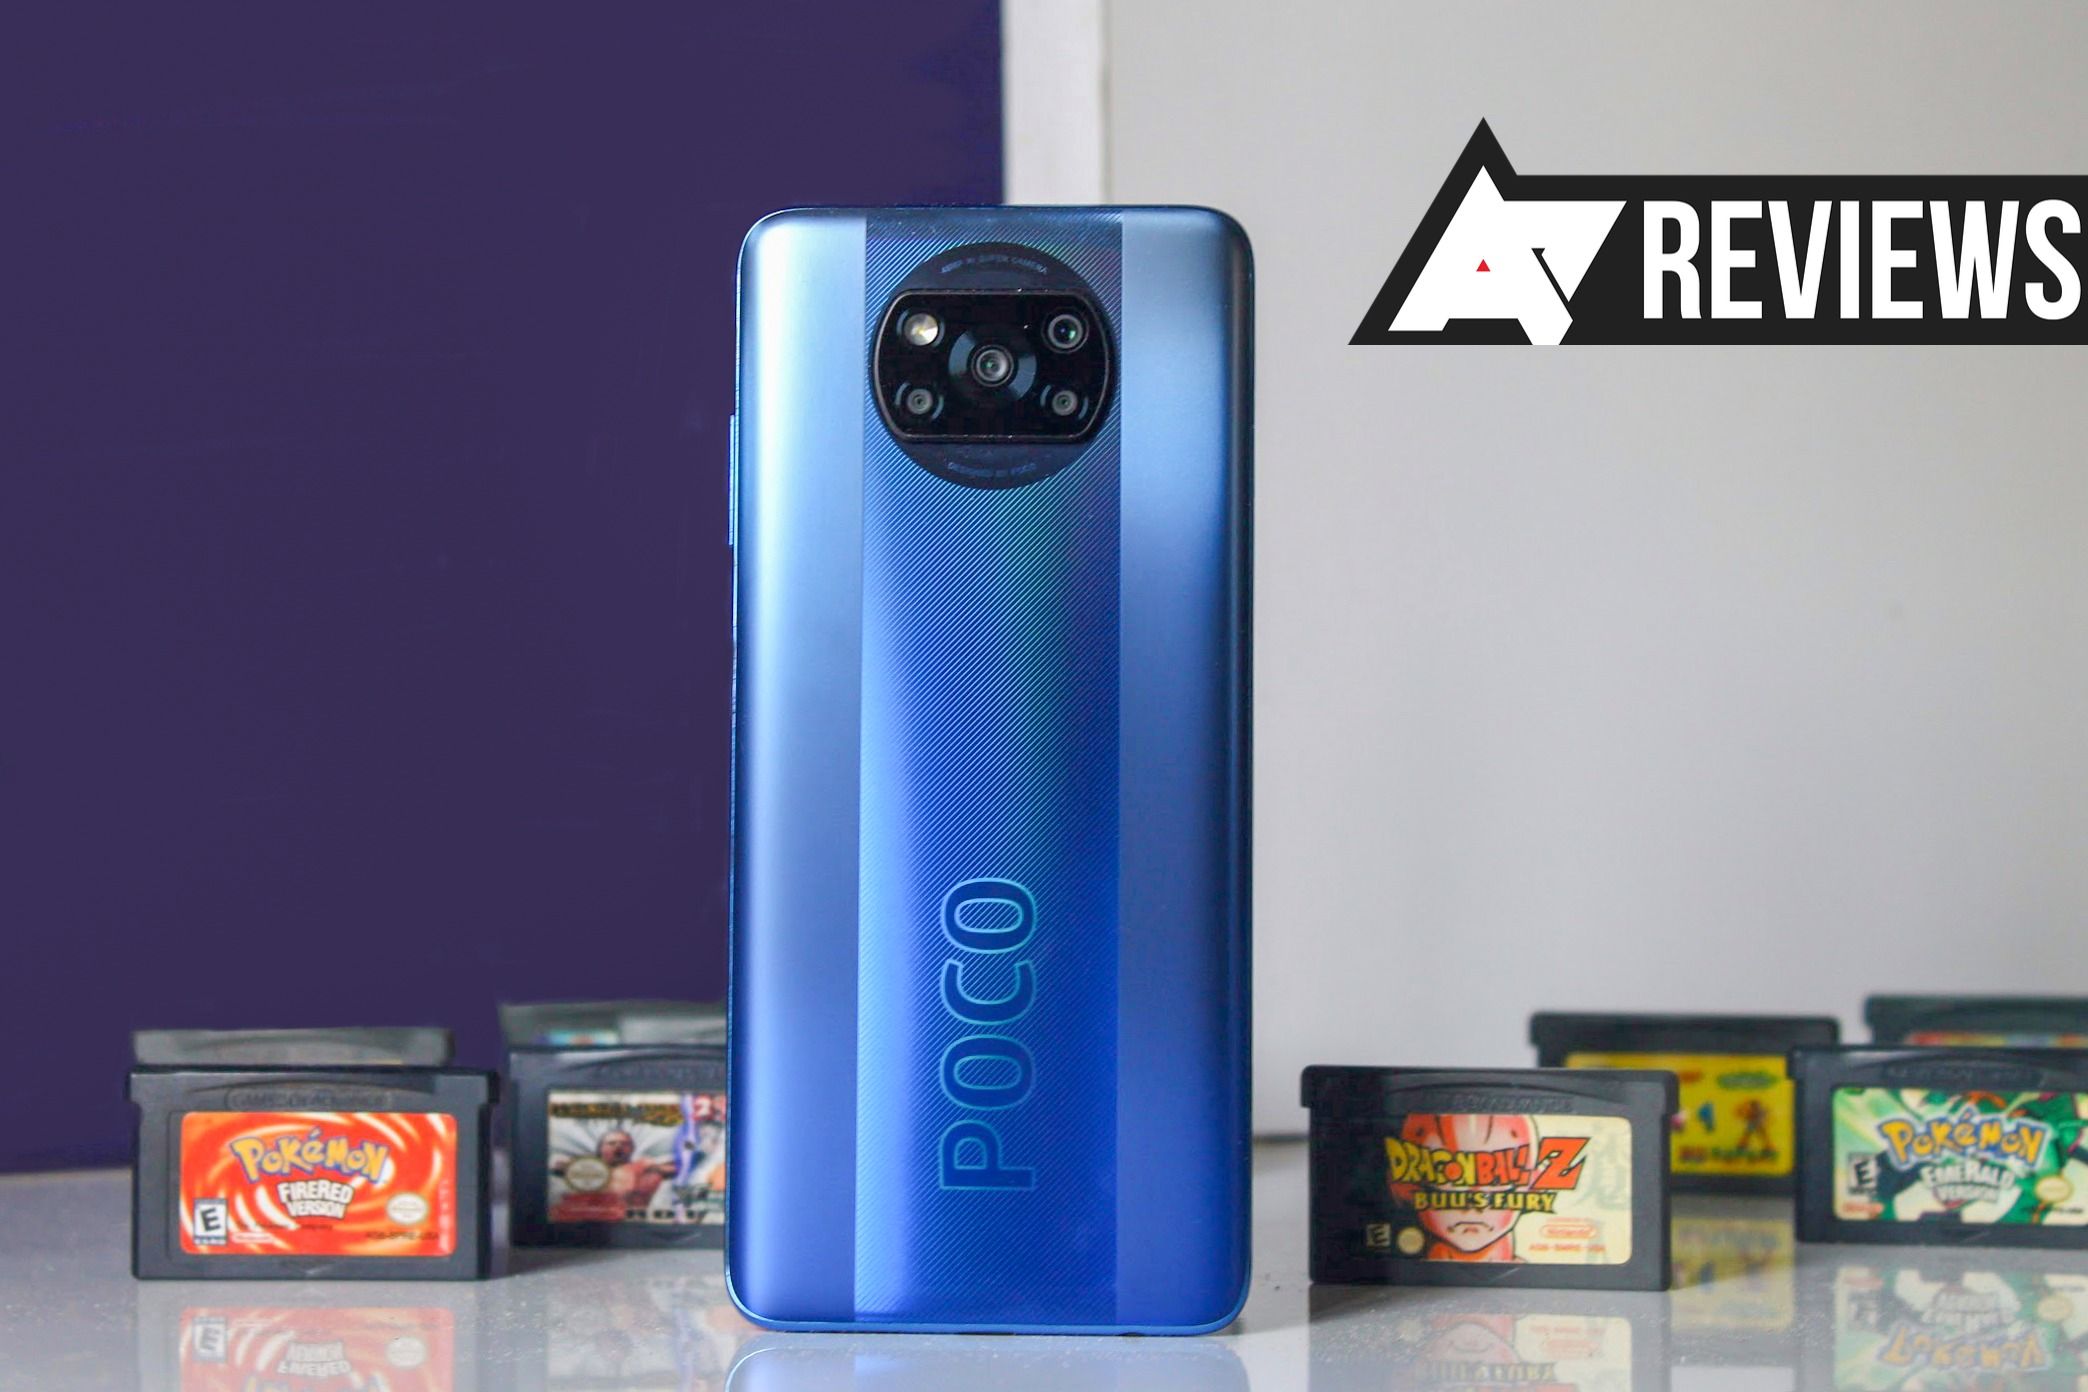 Poco X3 Pro review: Good mid-segment gaming smartphone under Rs 20K